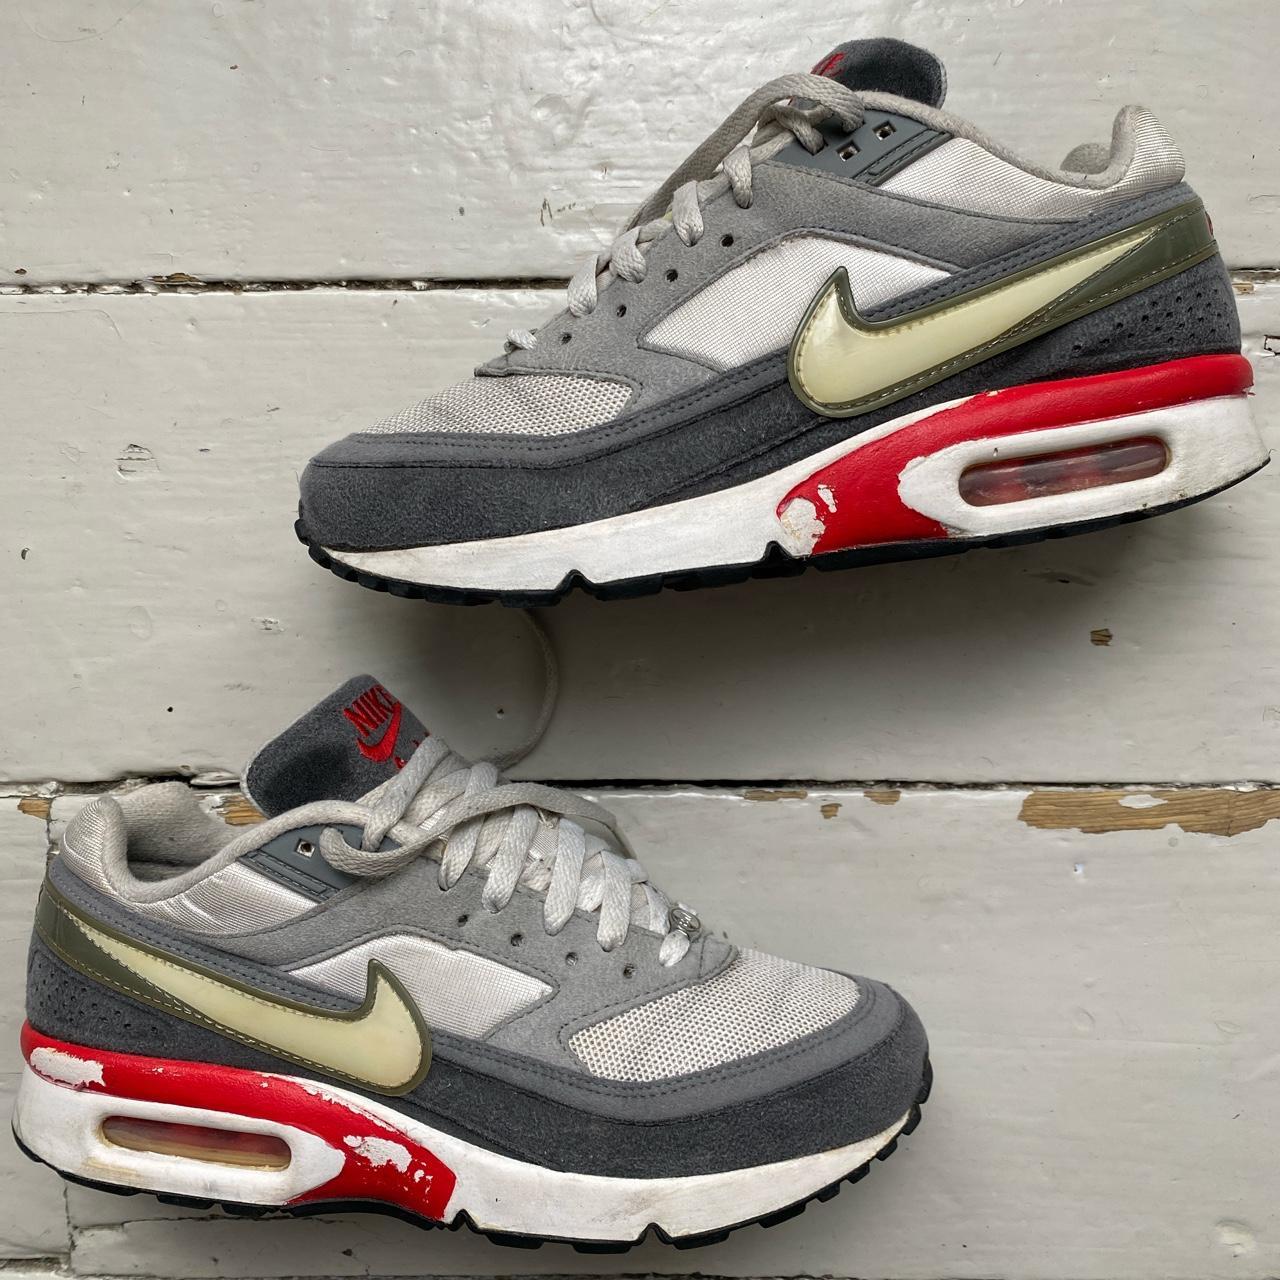 Nike Air Max BW Vintage 2012 White Grey and Red